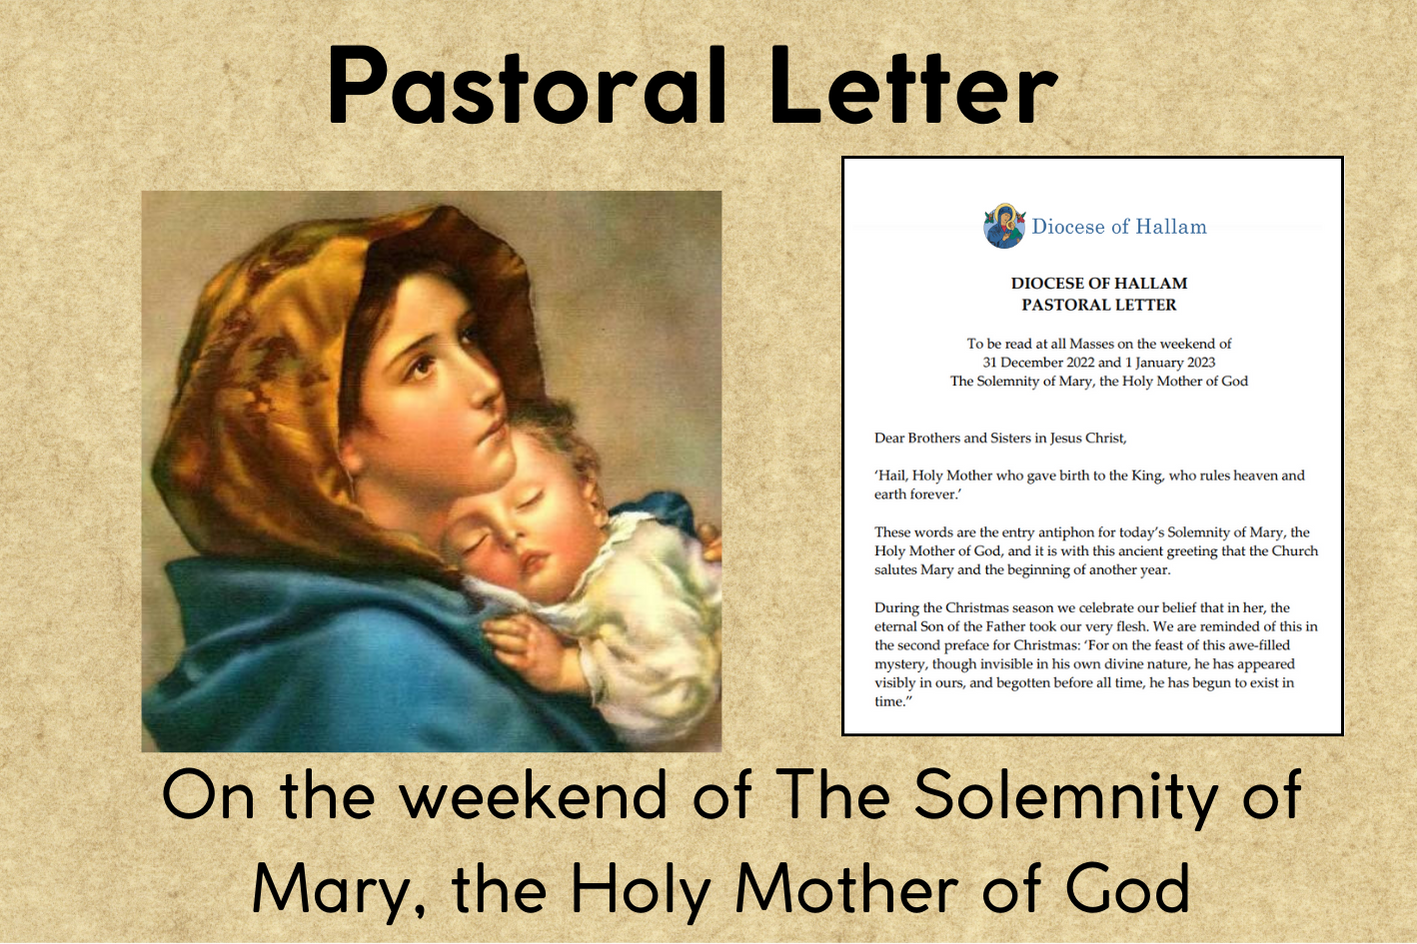 Pastoral letter, On the weekend of The Solemnity of Mary, the Holy Mother of God